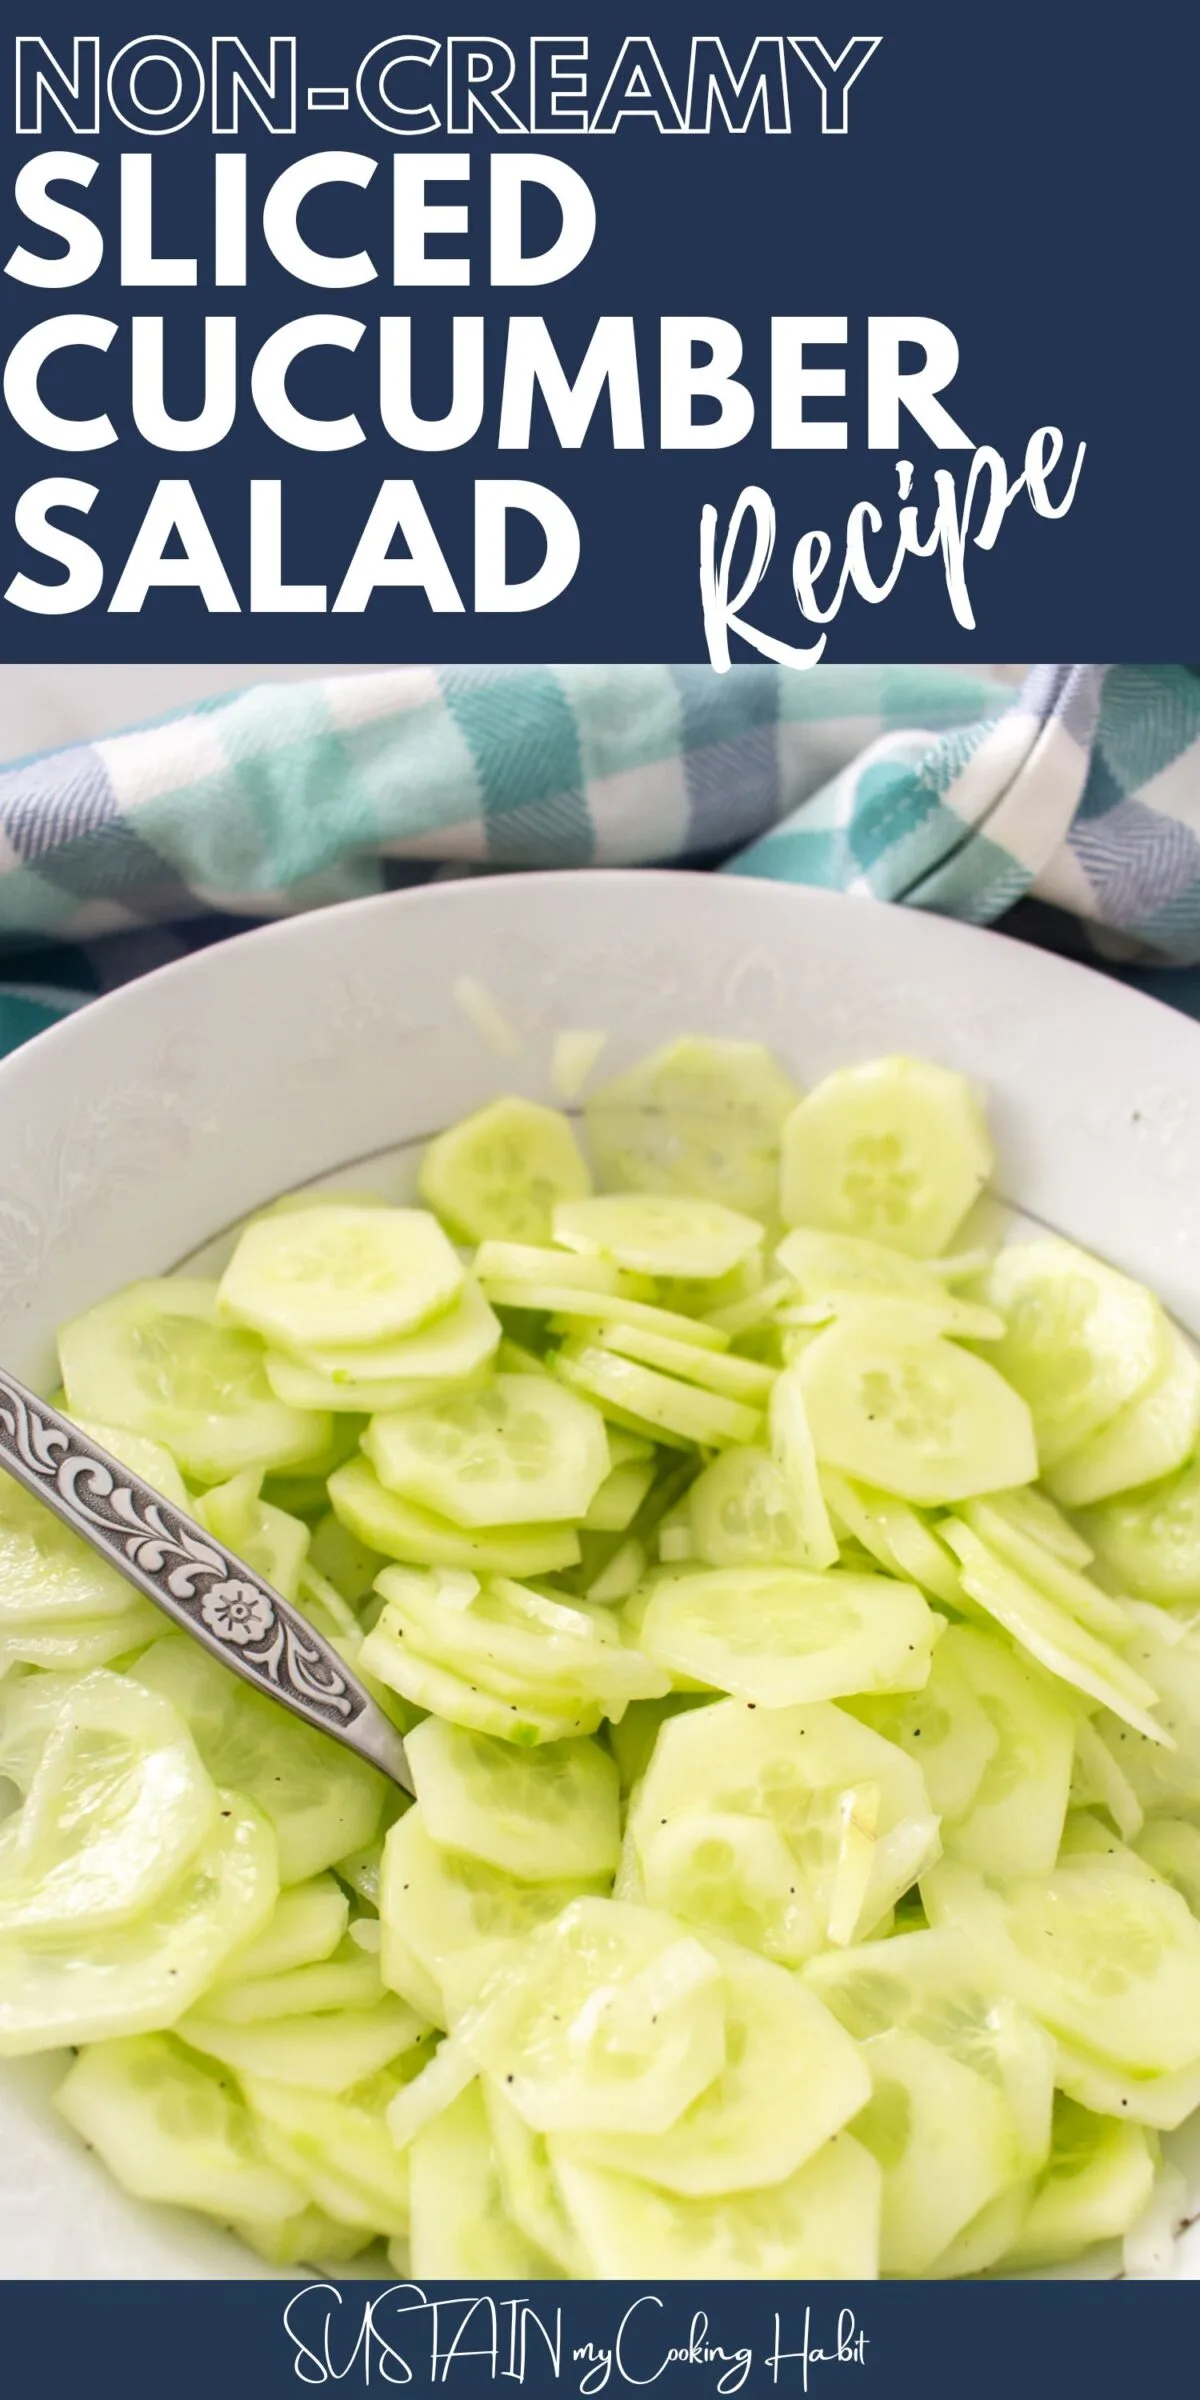 Close up of sliced cucumber salad in a bowl with text overlay.